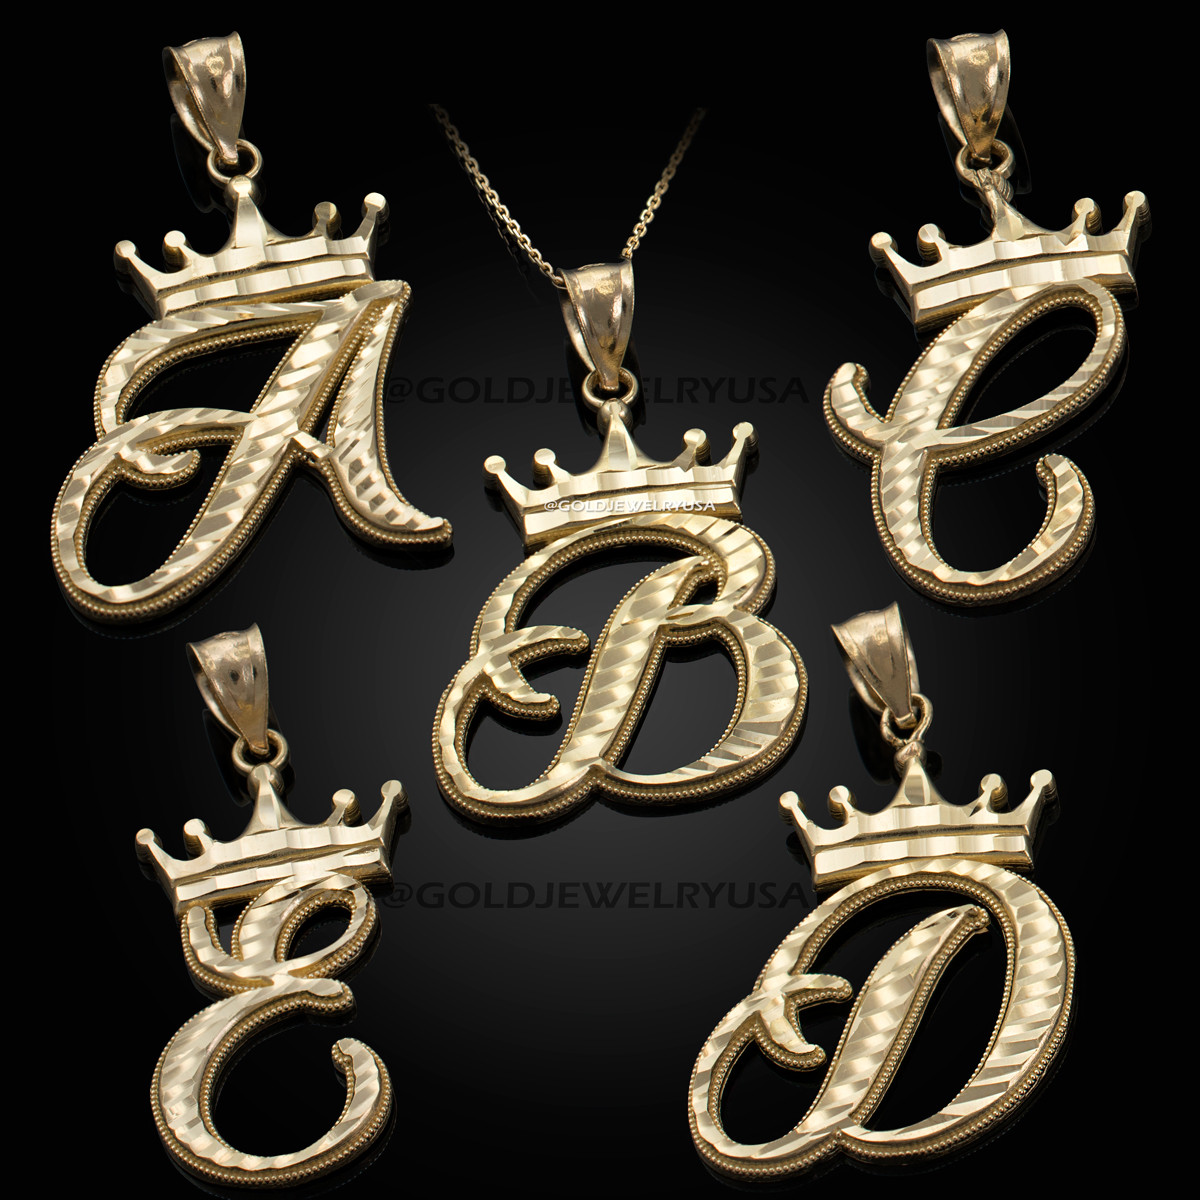 10K Yellow Gold Initial Monogram Name Letter B Charm Necklace